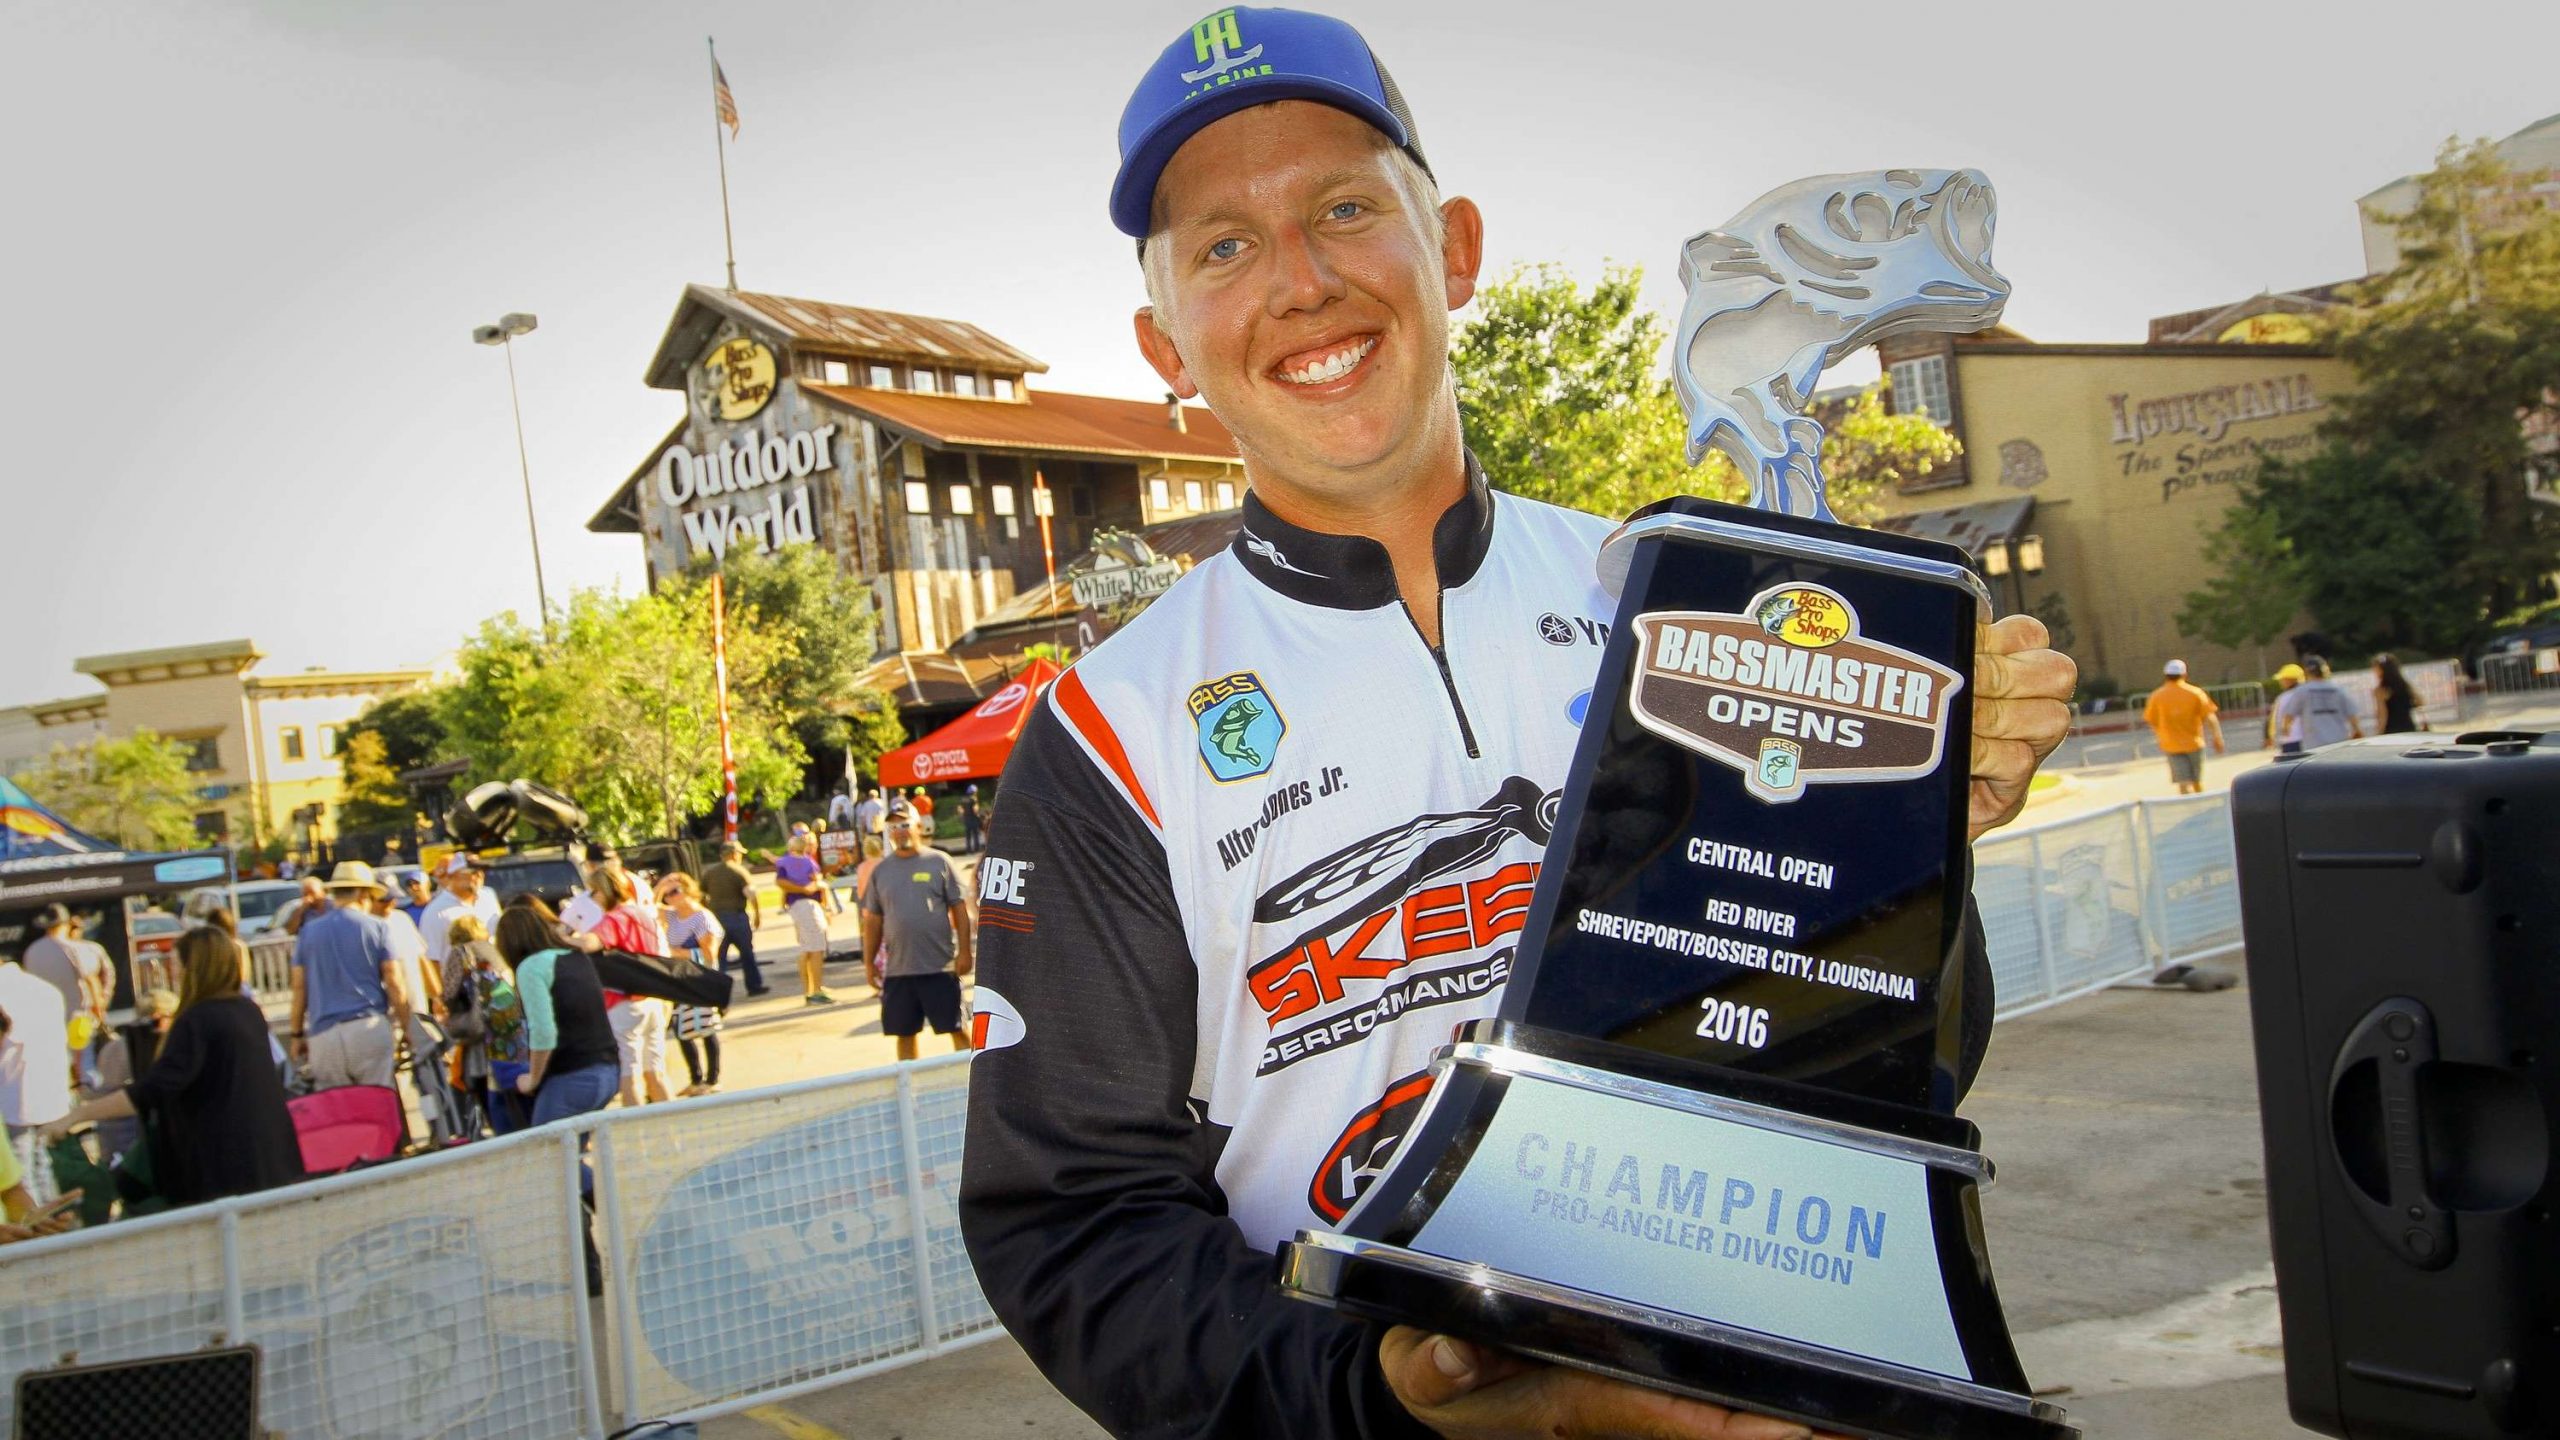 <h4>Alton Jones, Jr.</h4>
The Texan son of Elite Series pro Alton Jones qualified for the Elite Series this year with finishes of 15, 1 and 35 in the Central Opens, and a third-place finish in a Northern Open that almost had him qualifying there, too. Jones, Jr. will fish in his first Classic in 2017 as well. 